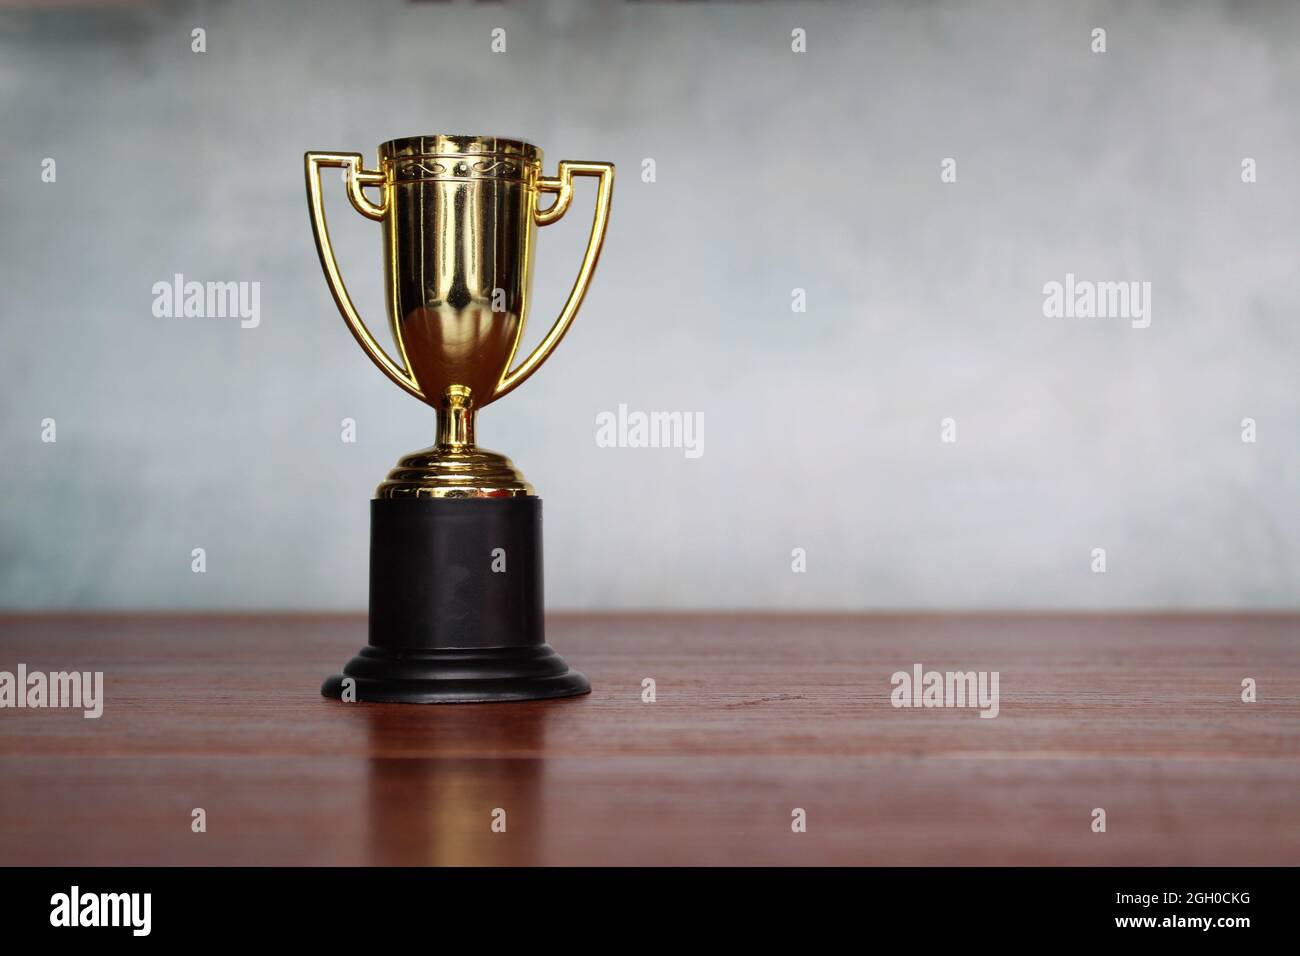 Gold trophy cup on table against concrete wall with copy space Stock Photo